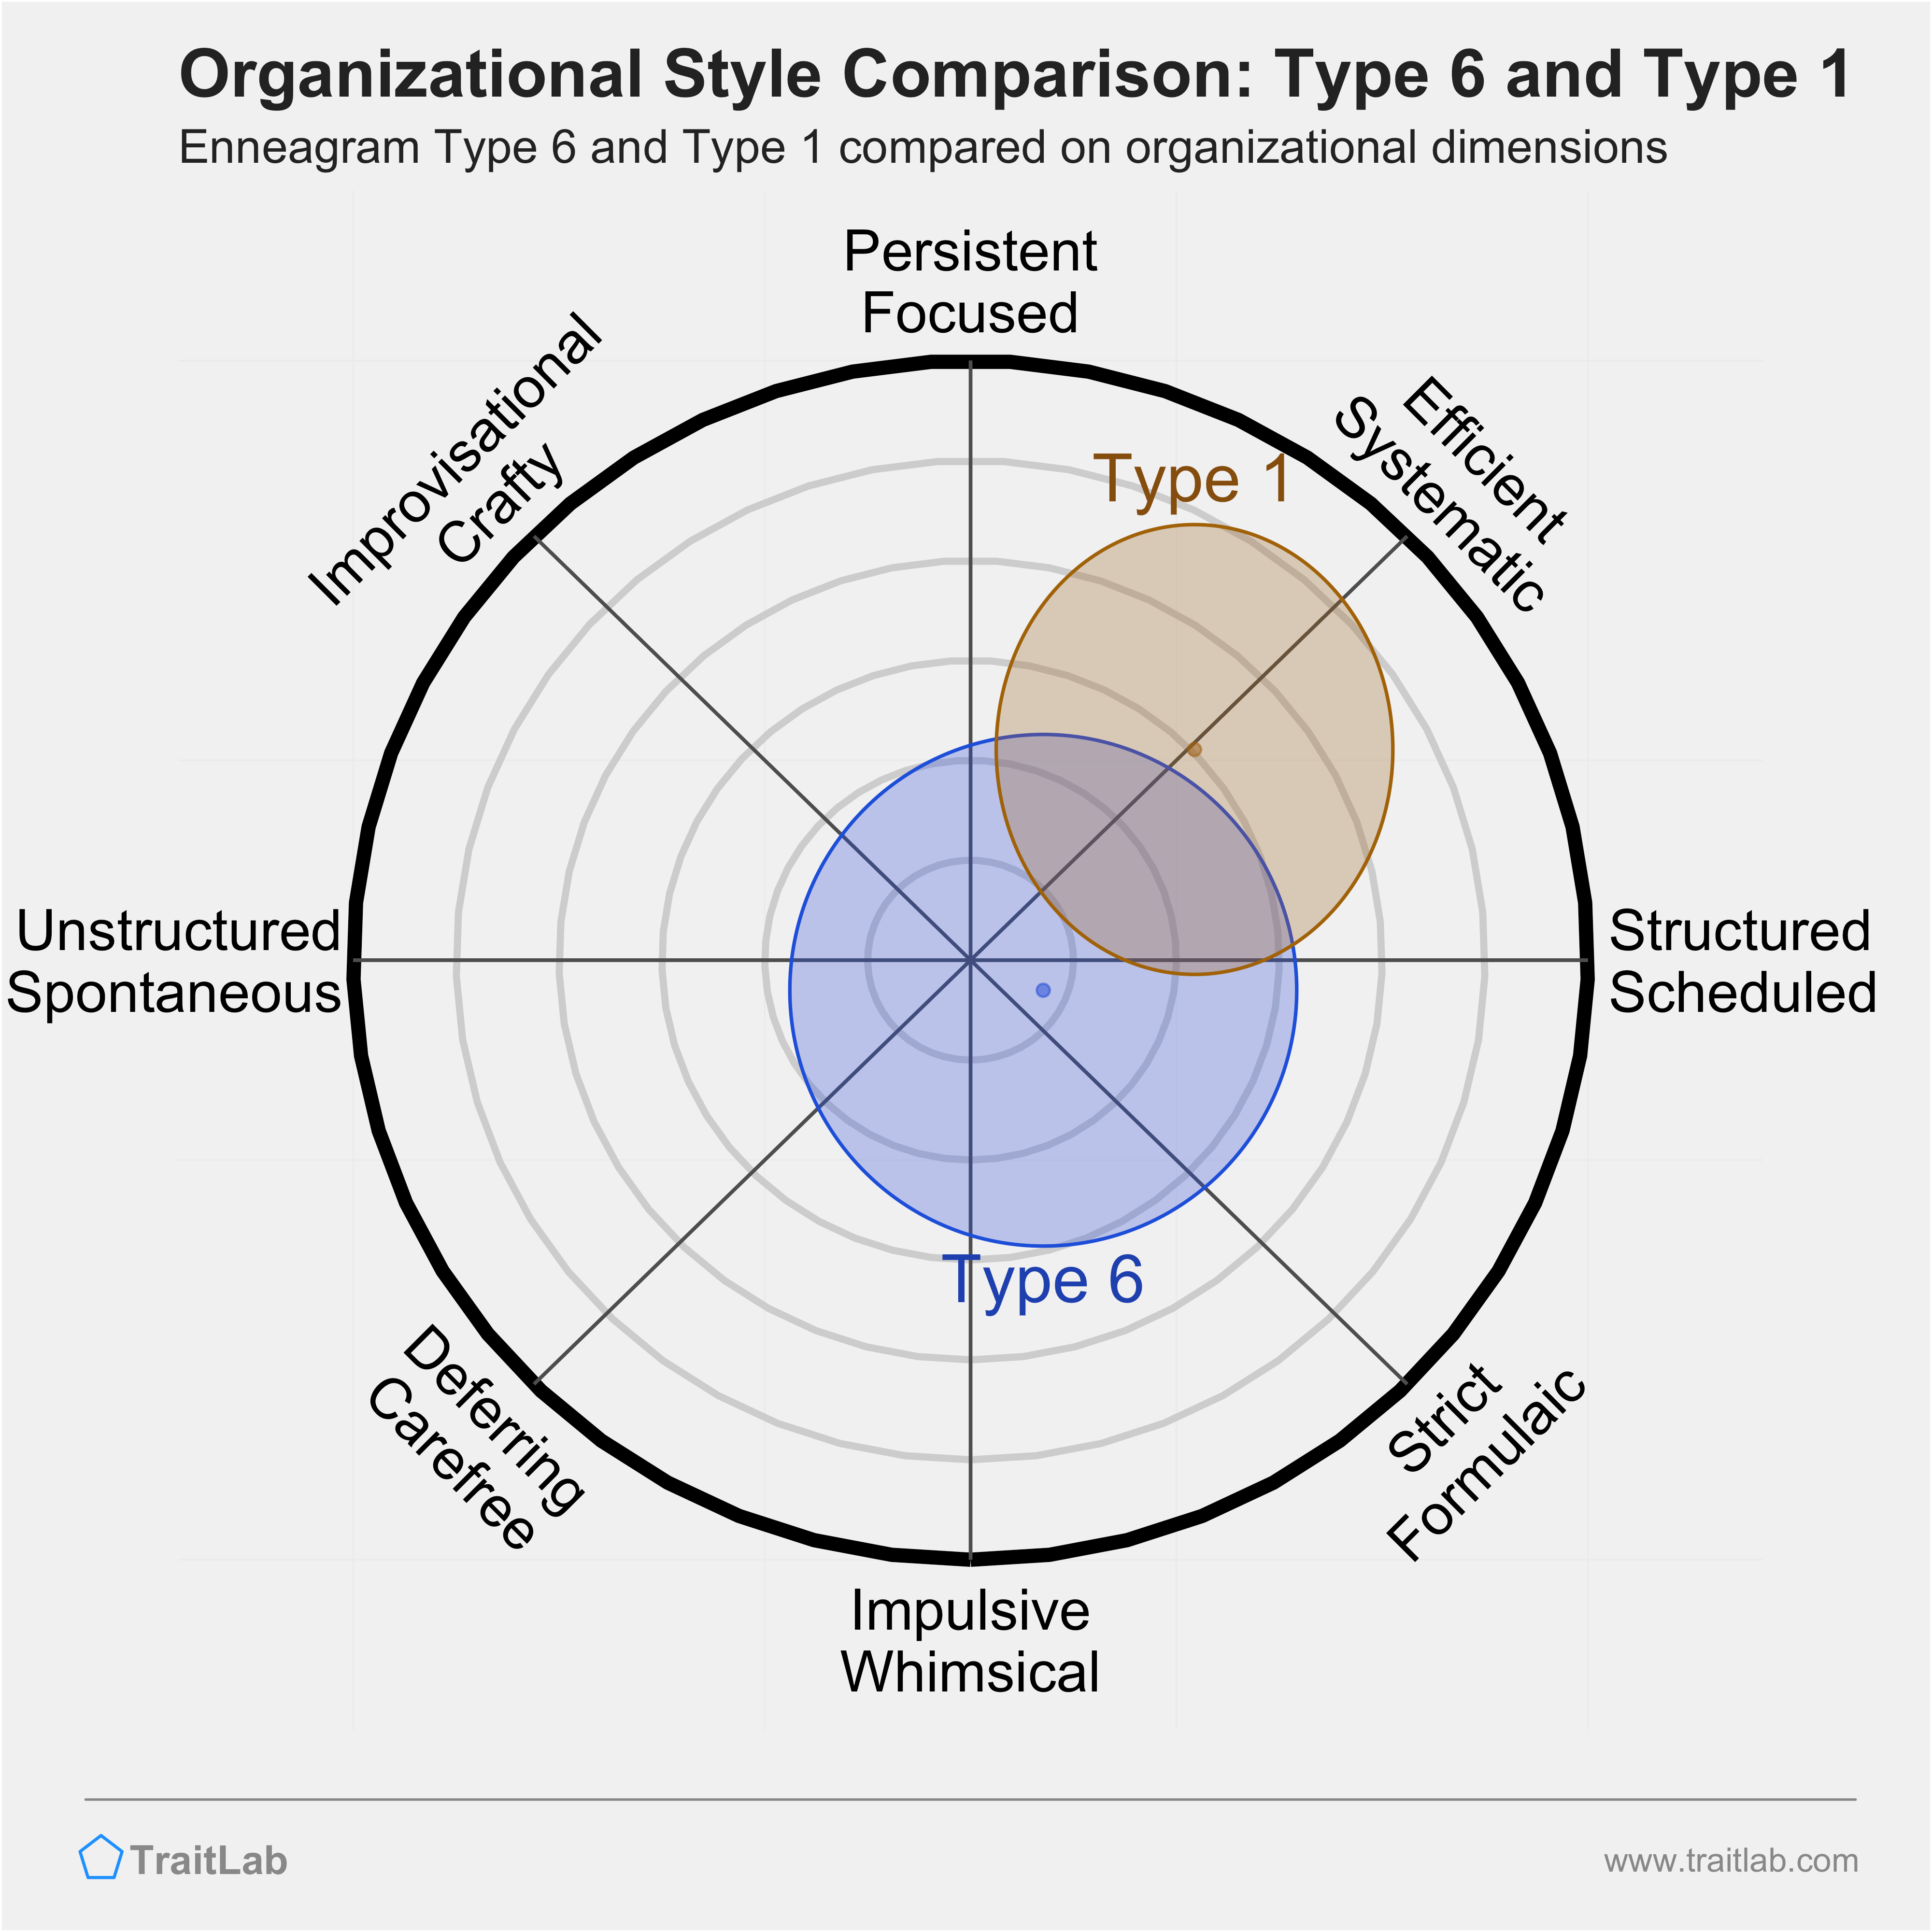 Type 6 and Type 1 comparison across organizational dimensions